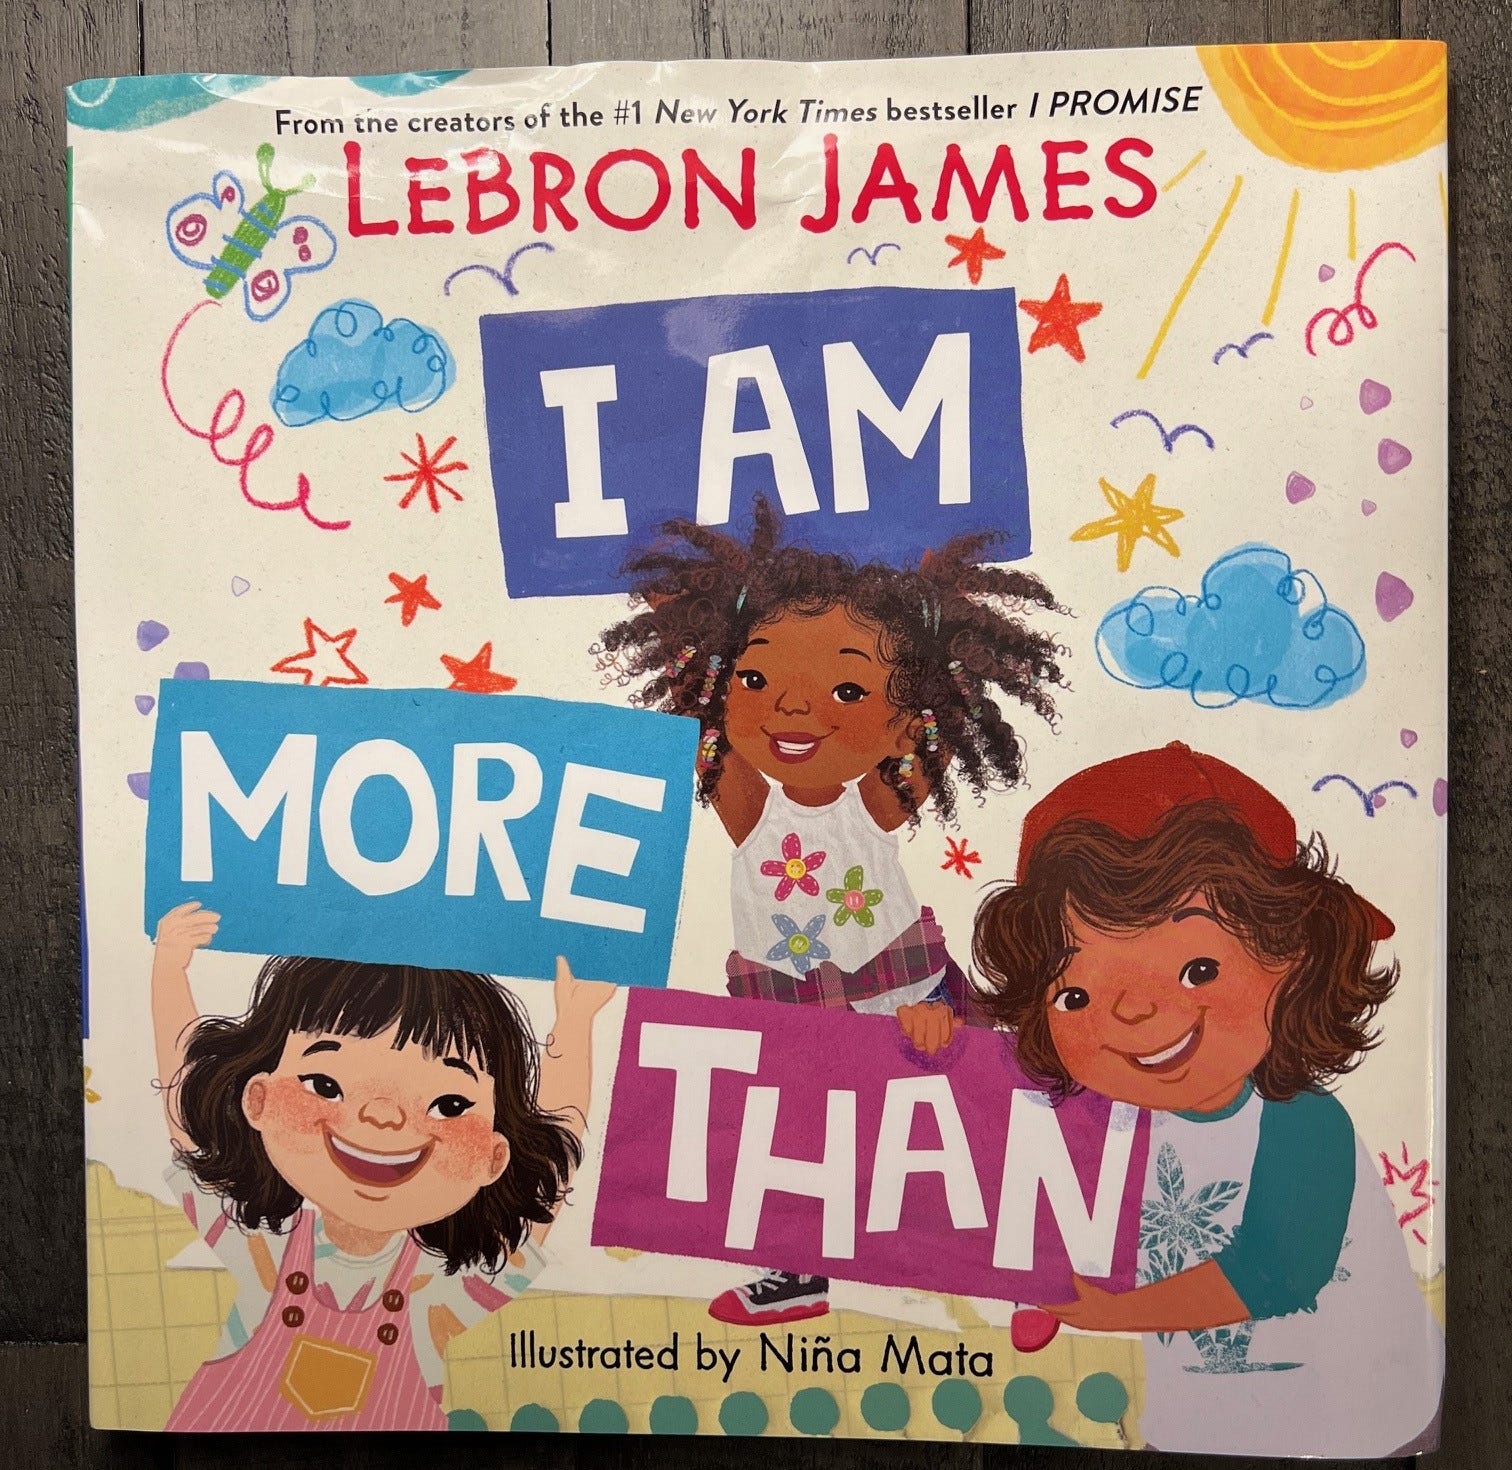 LeBron James' second children's book, I Am More Than.